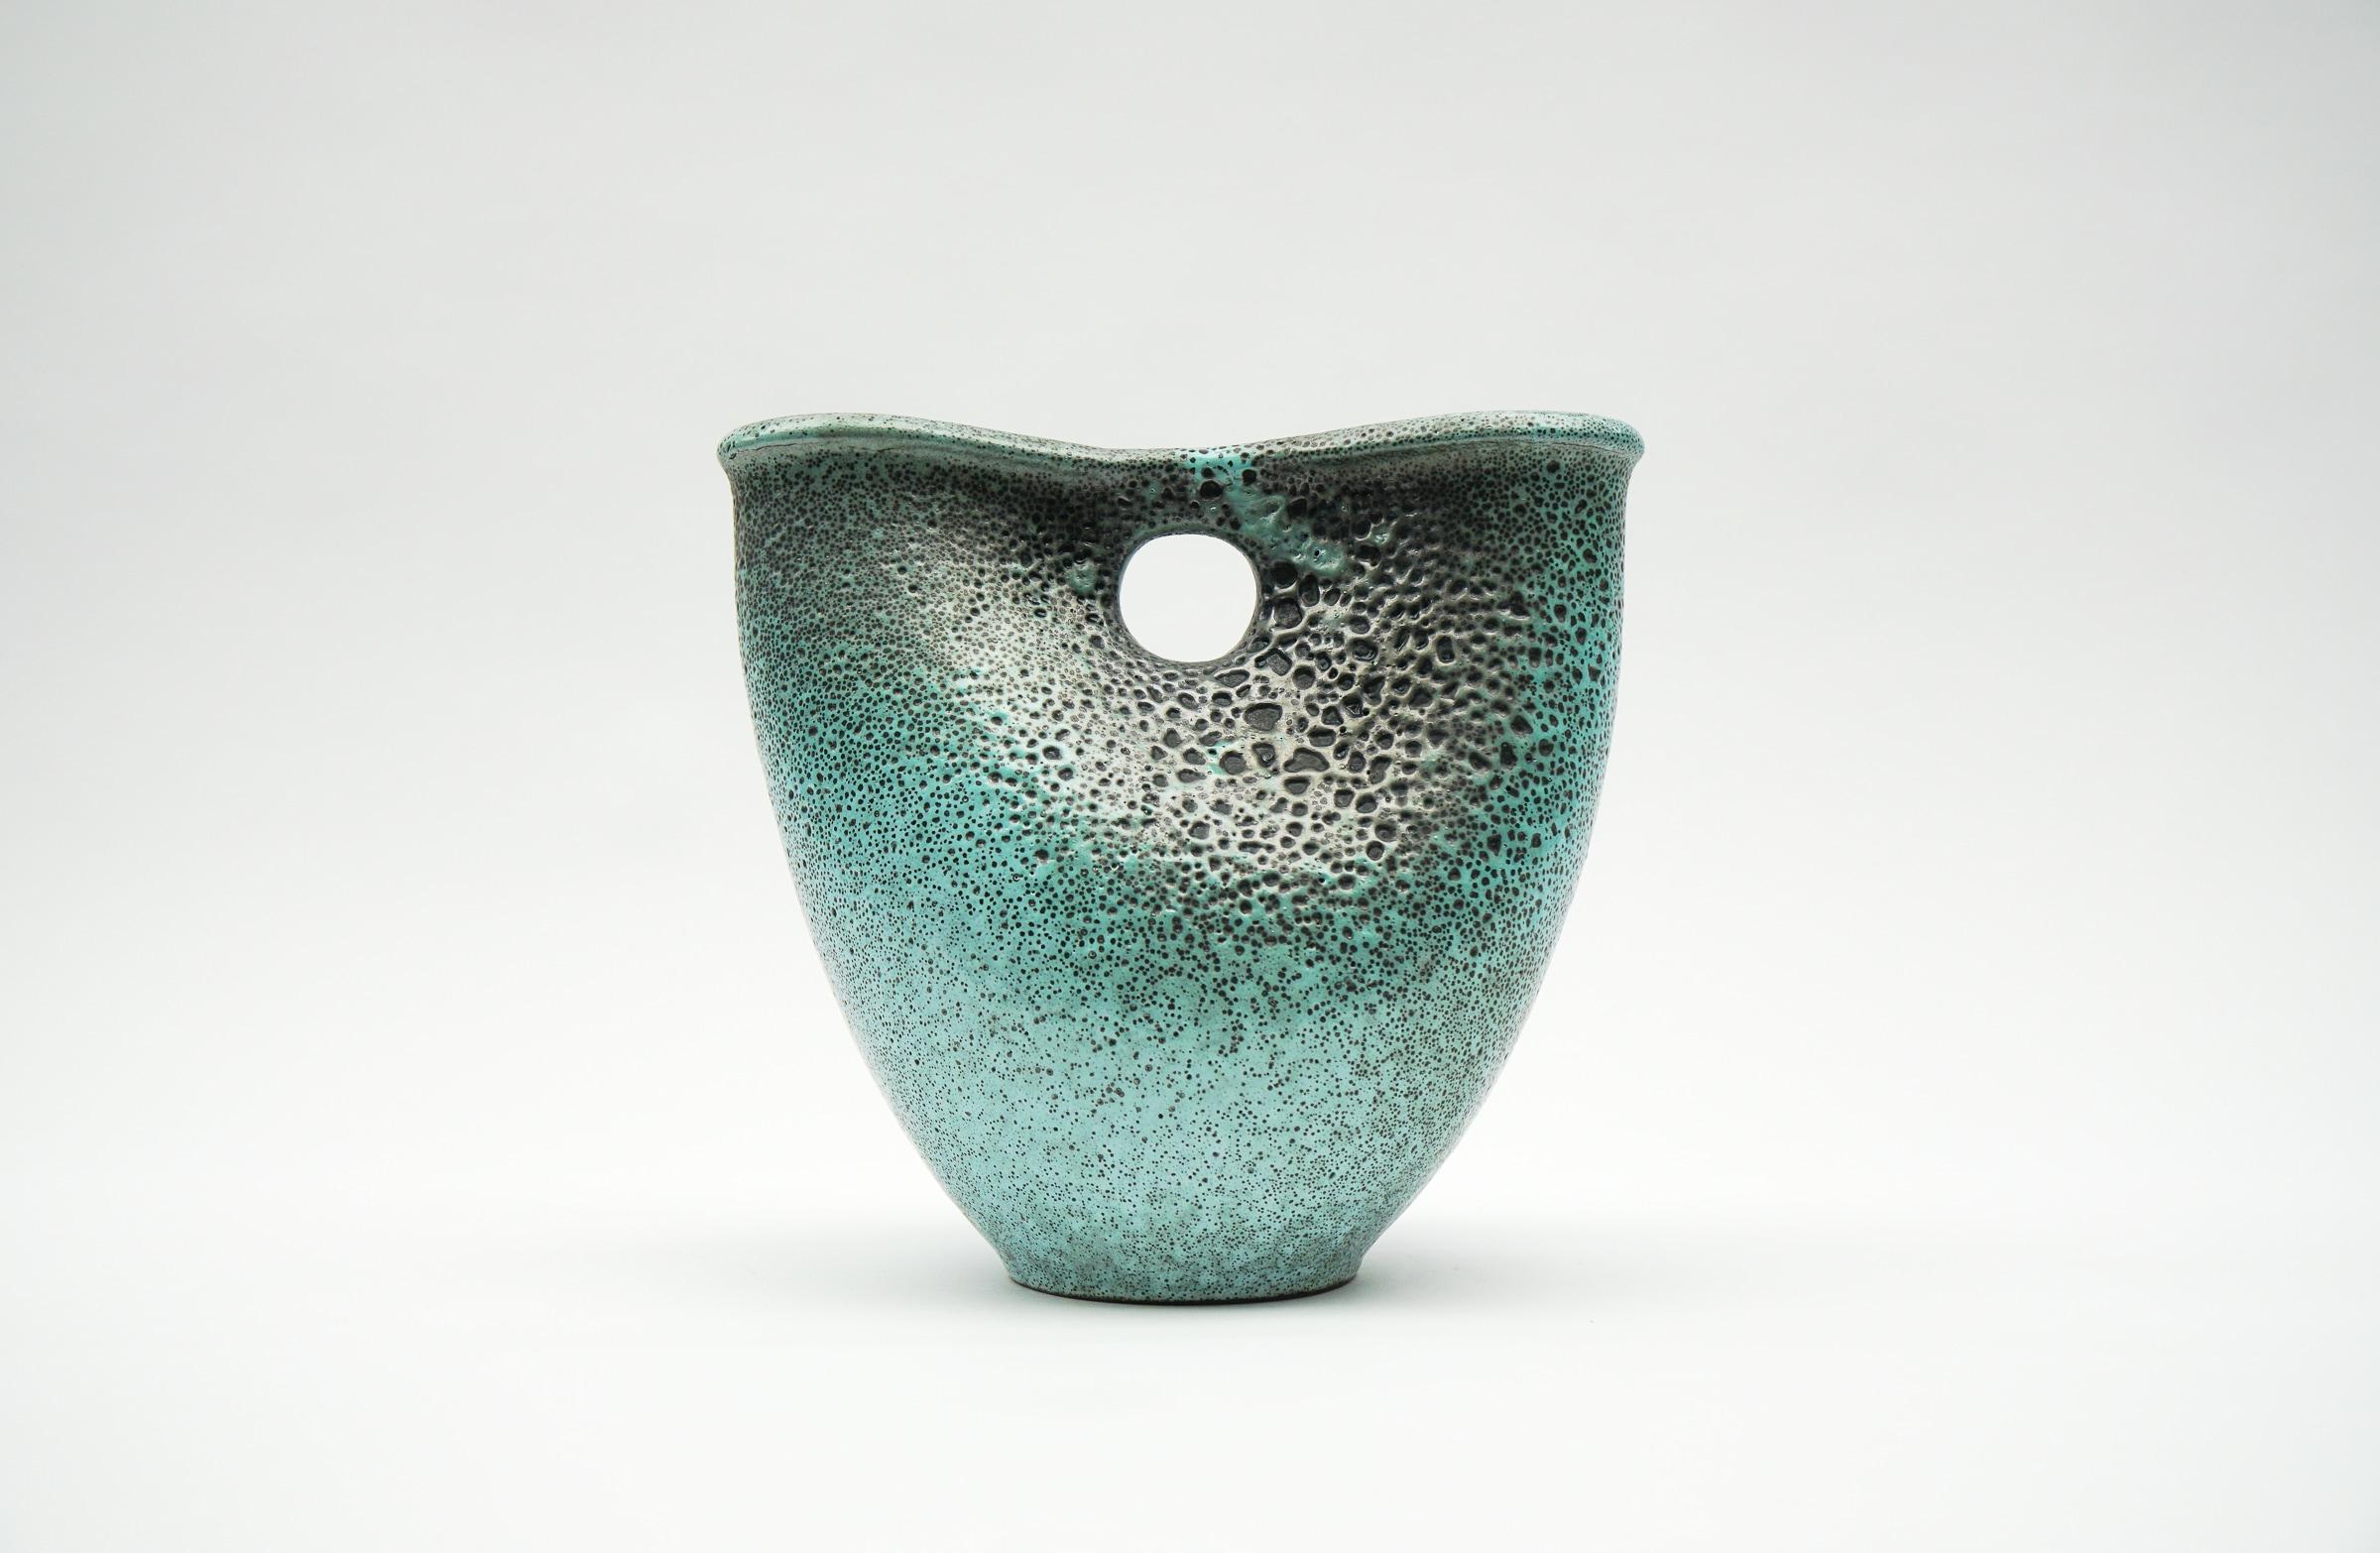 Green Hole Lava Studio Ceramic Vase by Wilhelm & Elly Kuch, 1960s, Germany

Very good condition.

---------------------------------------

Wilhelm Kuch, born 1925, 1947 apprenticeship - Gusso Reuss in Munich - 1948 opened the studio in Burgthann -